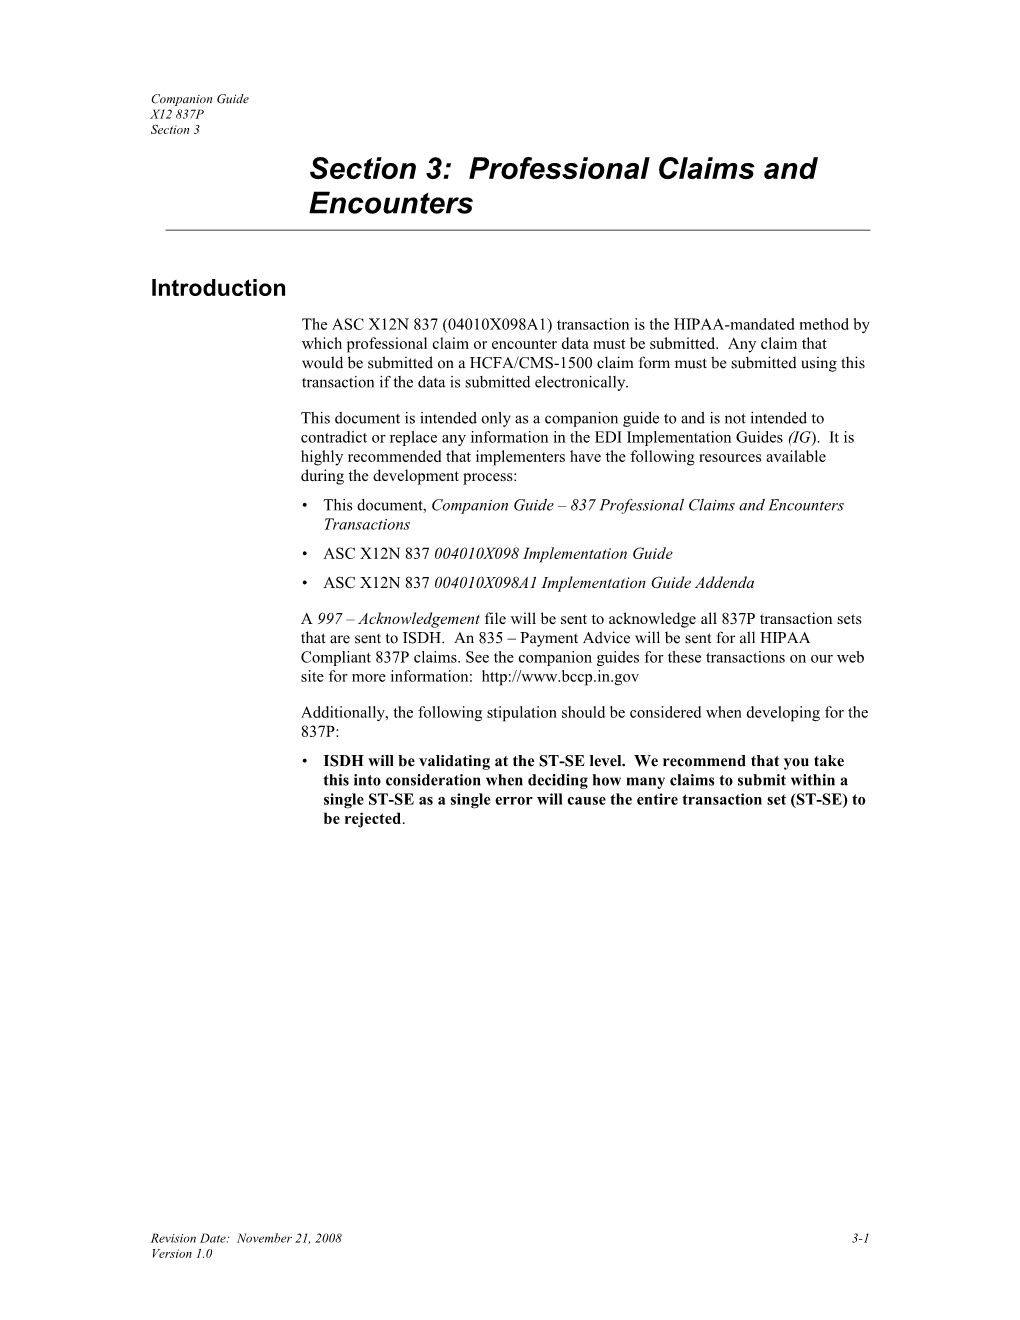 Section 3: Professional Claims and Encounters